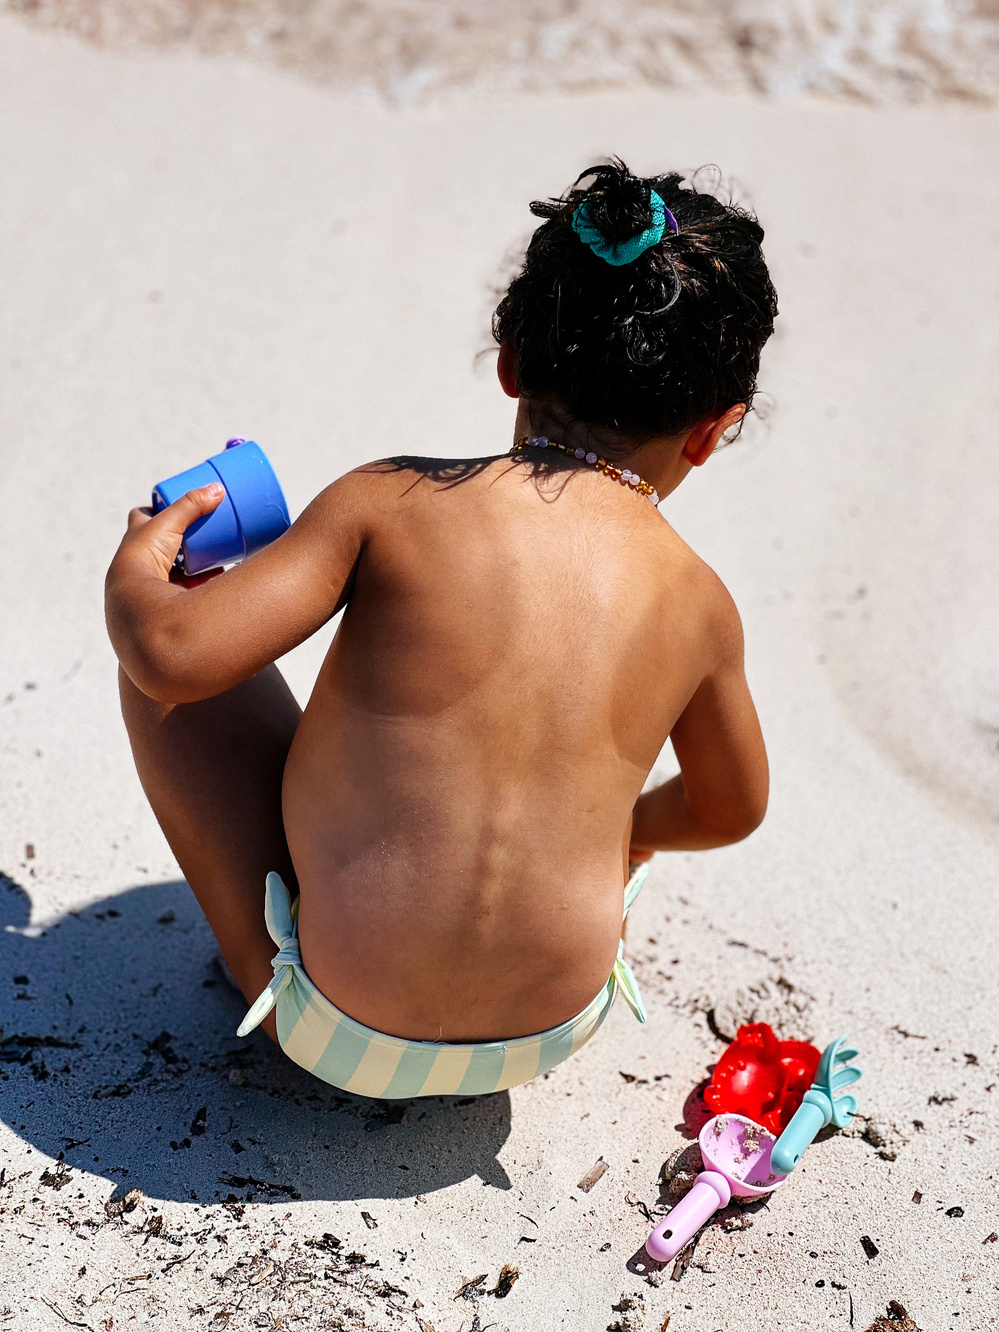 A young child is sitting in the sand at a beach, wearing a blue and white striped swimsuit bottom and a turquoise hair tie. The child is holding a blue toy cup and has a necklace on. There are sand toys, including a red crab mold.